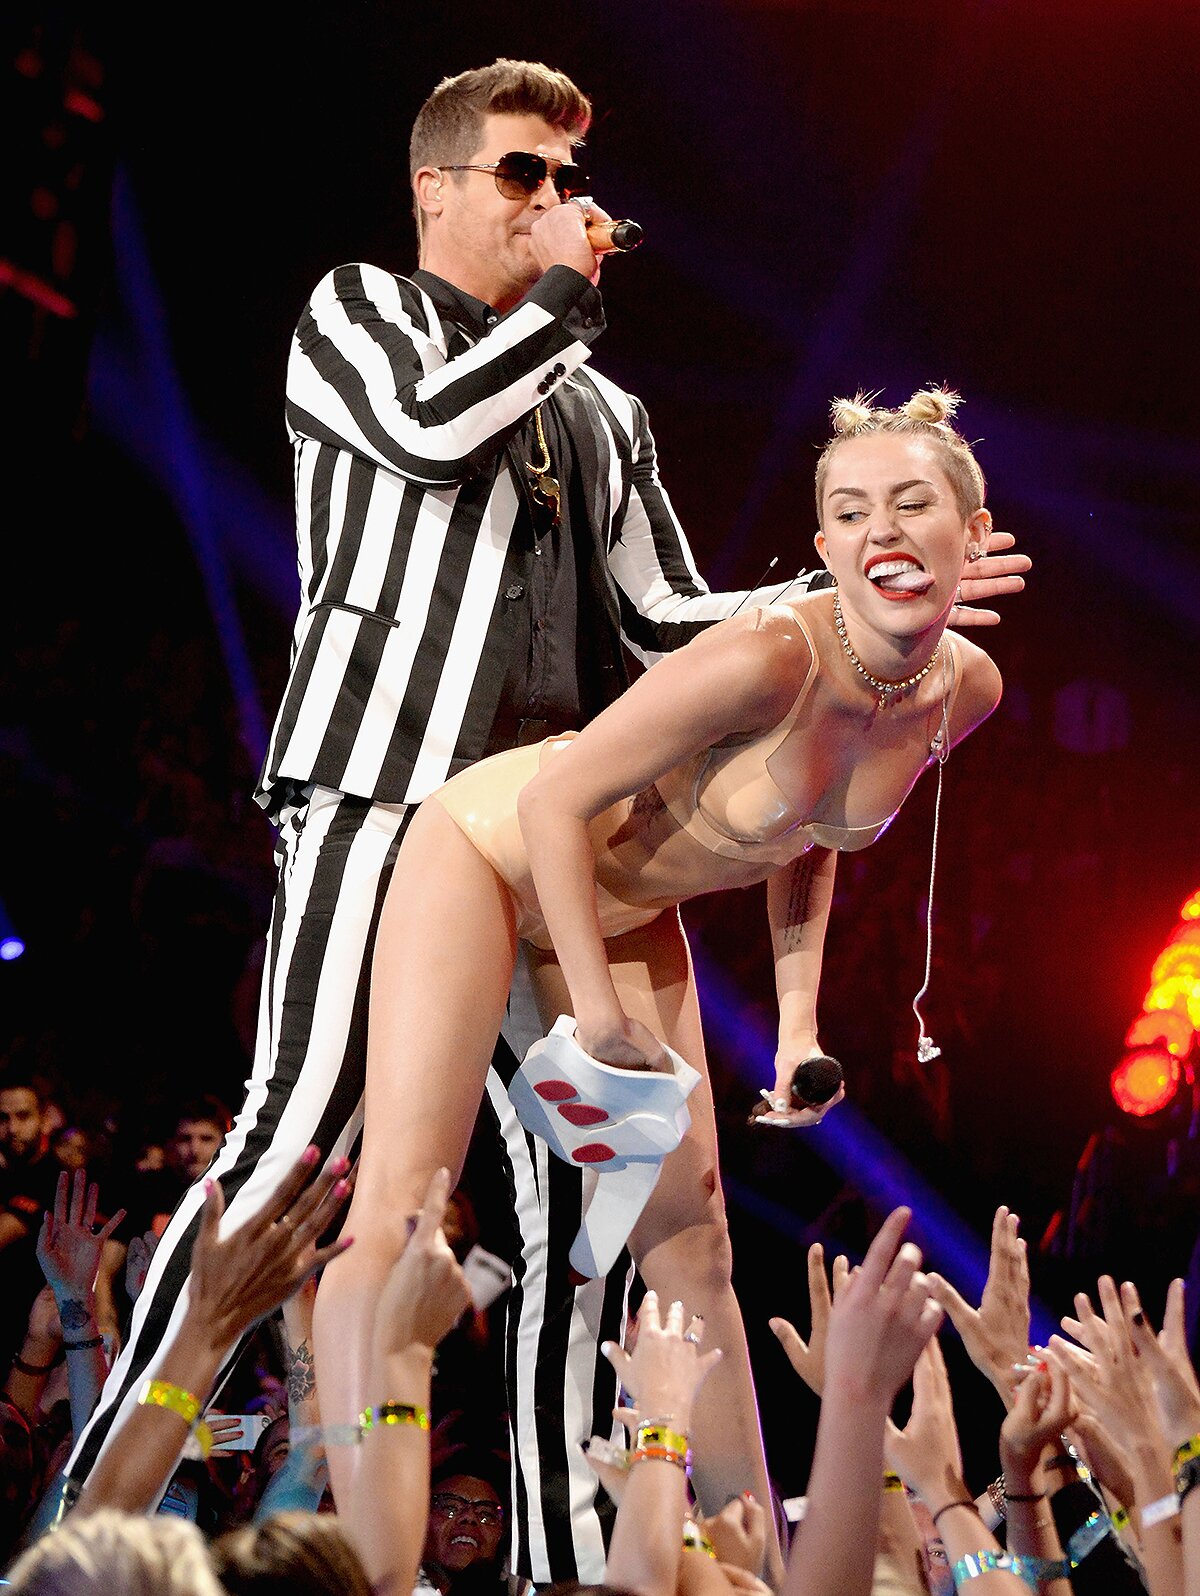 dennis young sr recommends miley cyrus real porn video pic